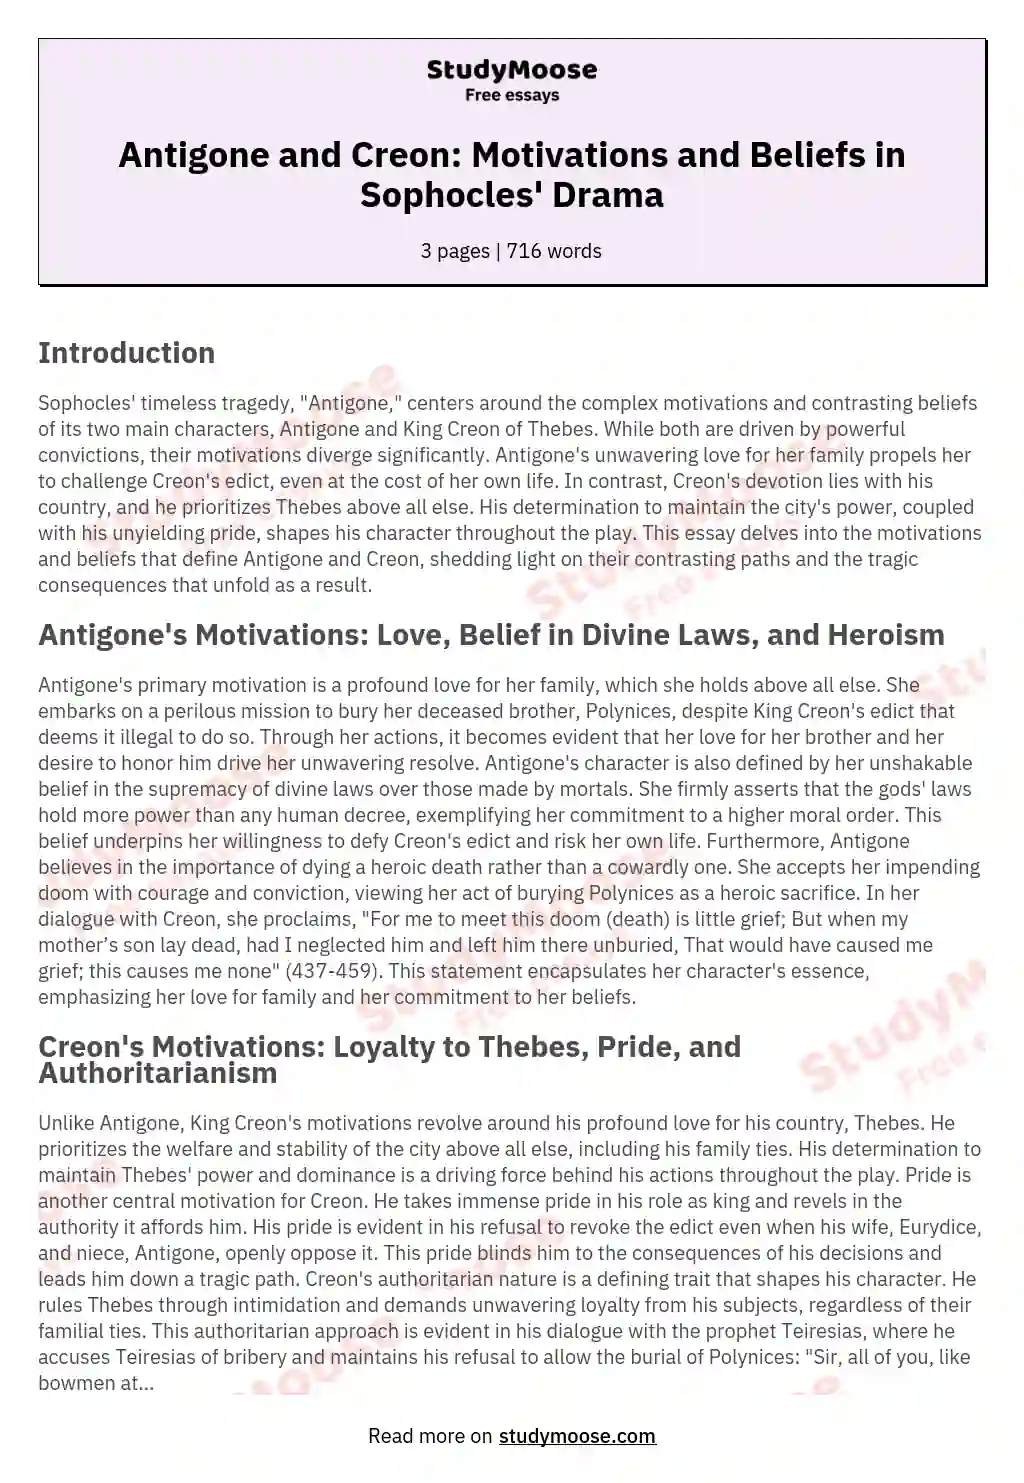 Antigone and Creon: Motivations and Beliefs in Sophocles' Drama essay